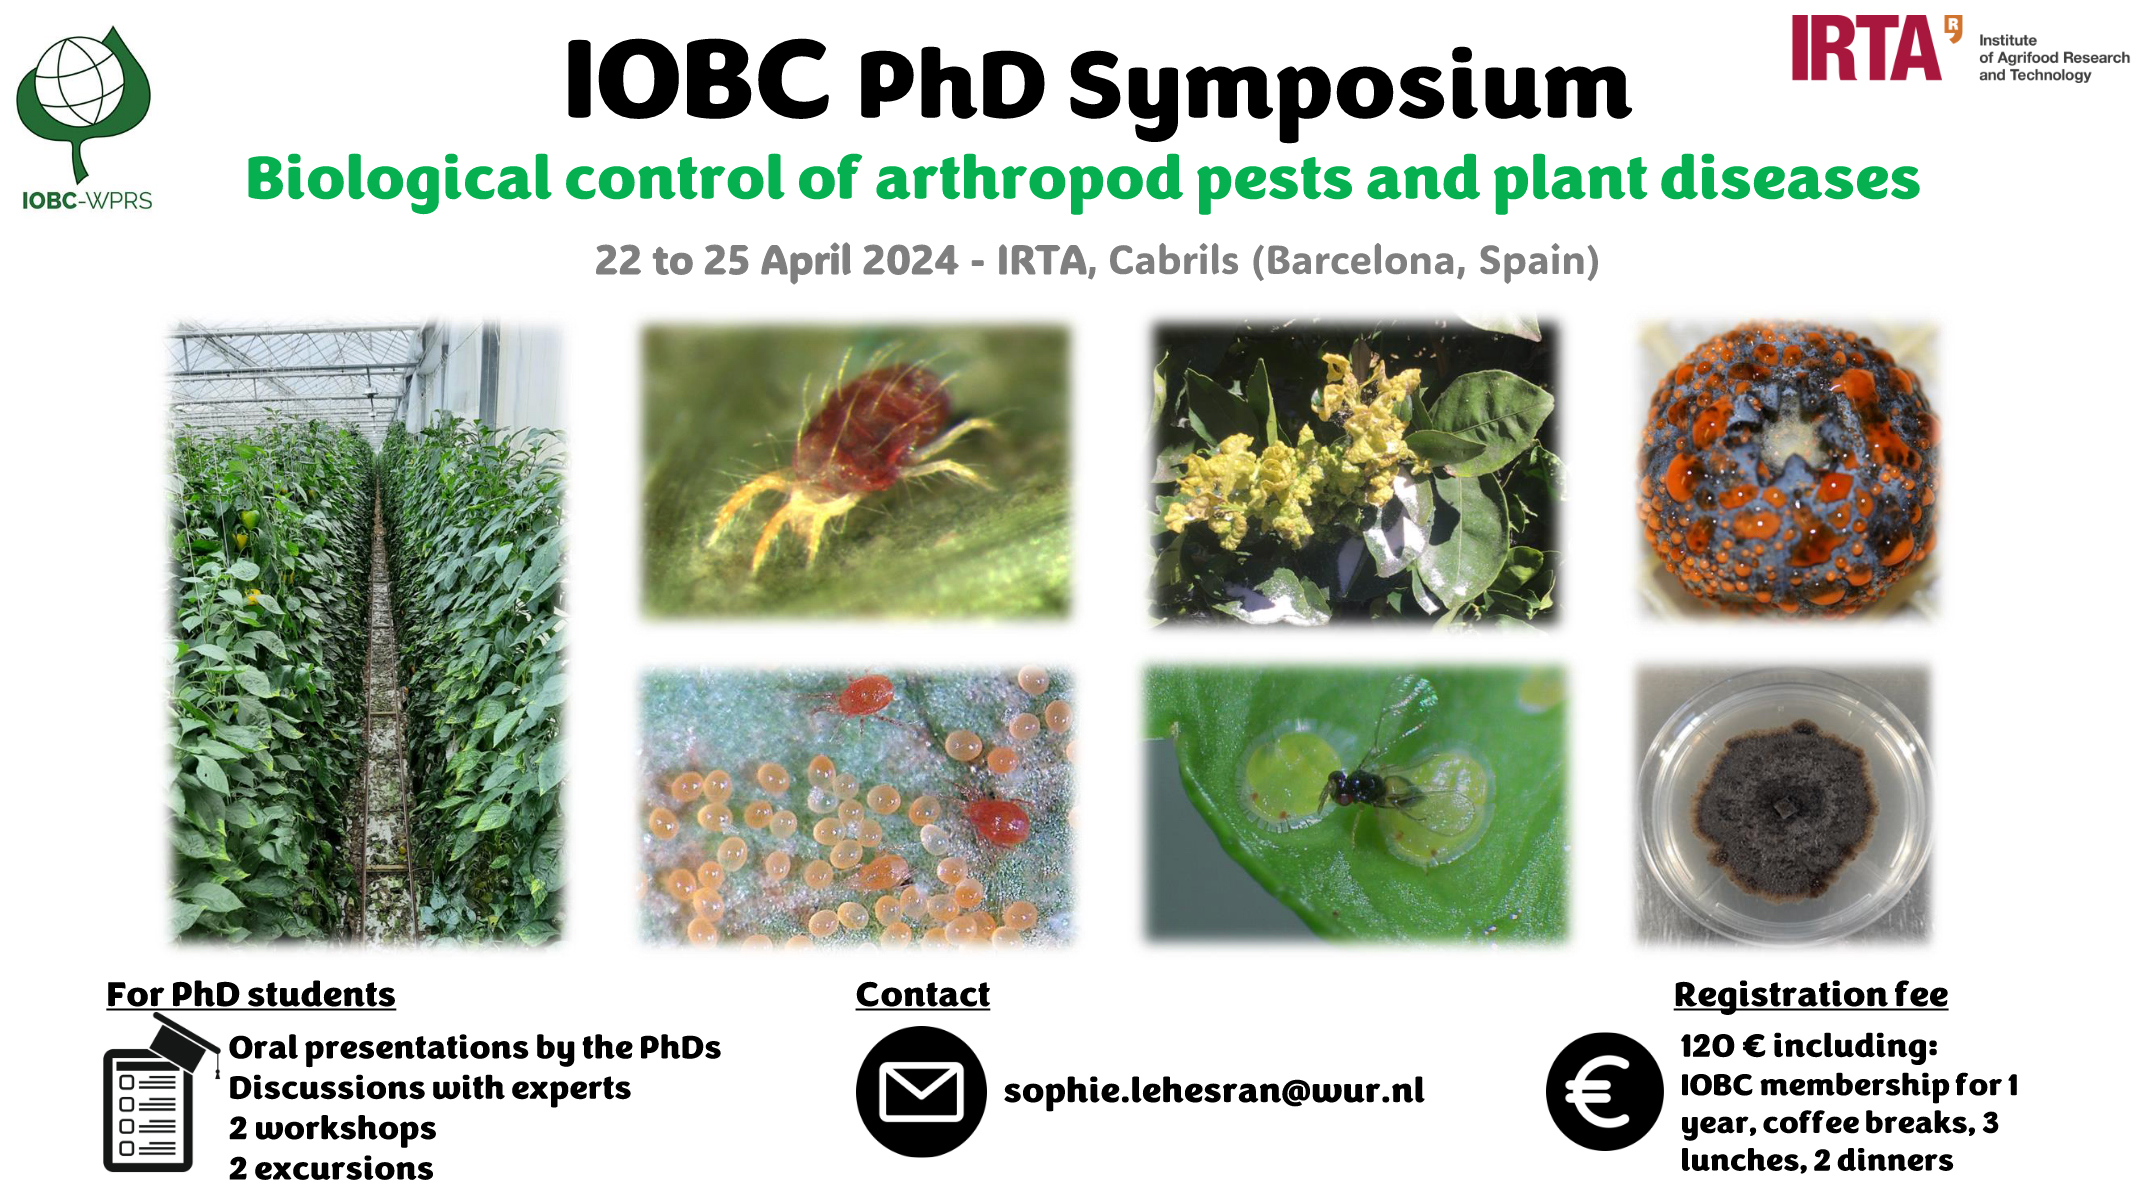 IOBC-WPRS PhD Symposium: Biological Control of arthropod pests and plant diseases, 22 to 25 April 2024 - IRTA, Cabrils, Barcelona, Spain